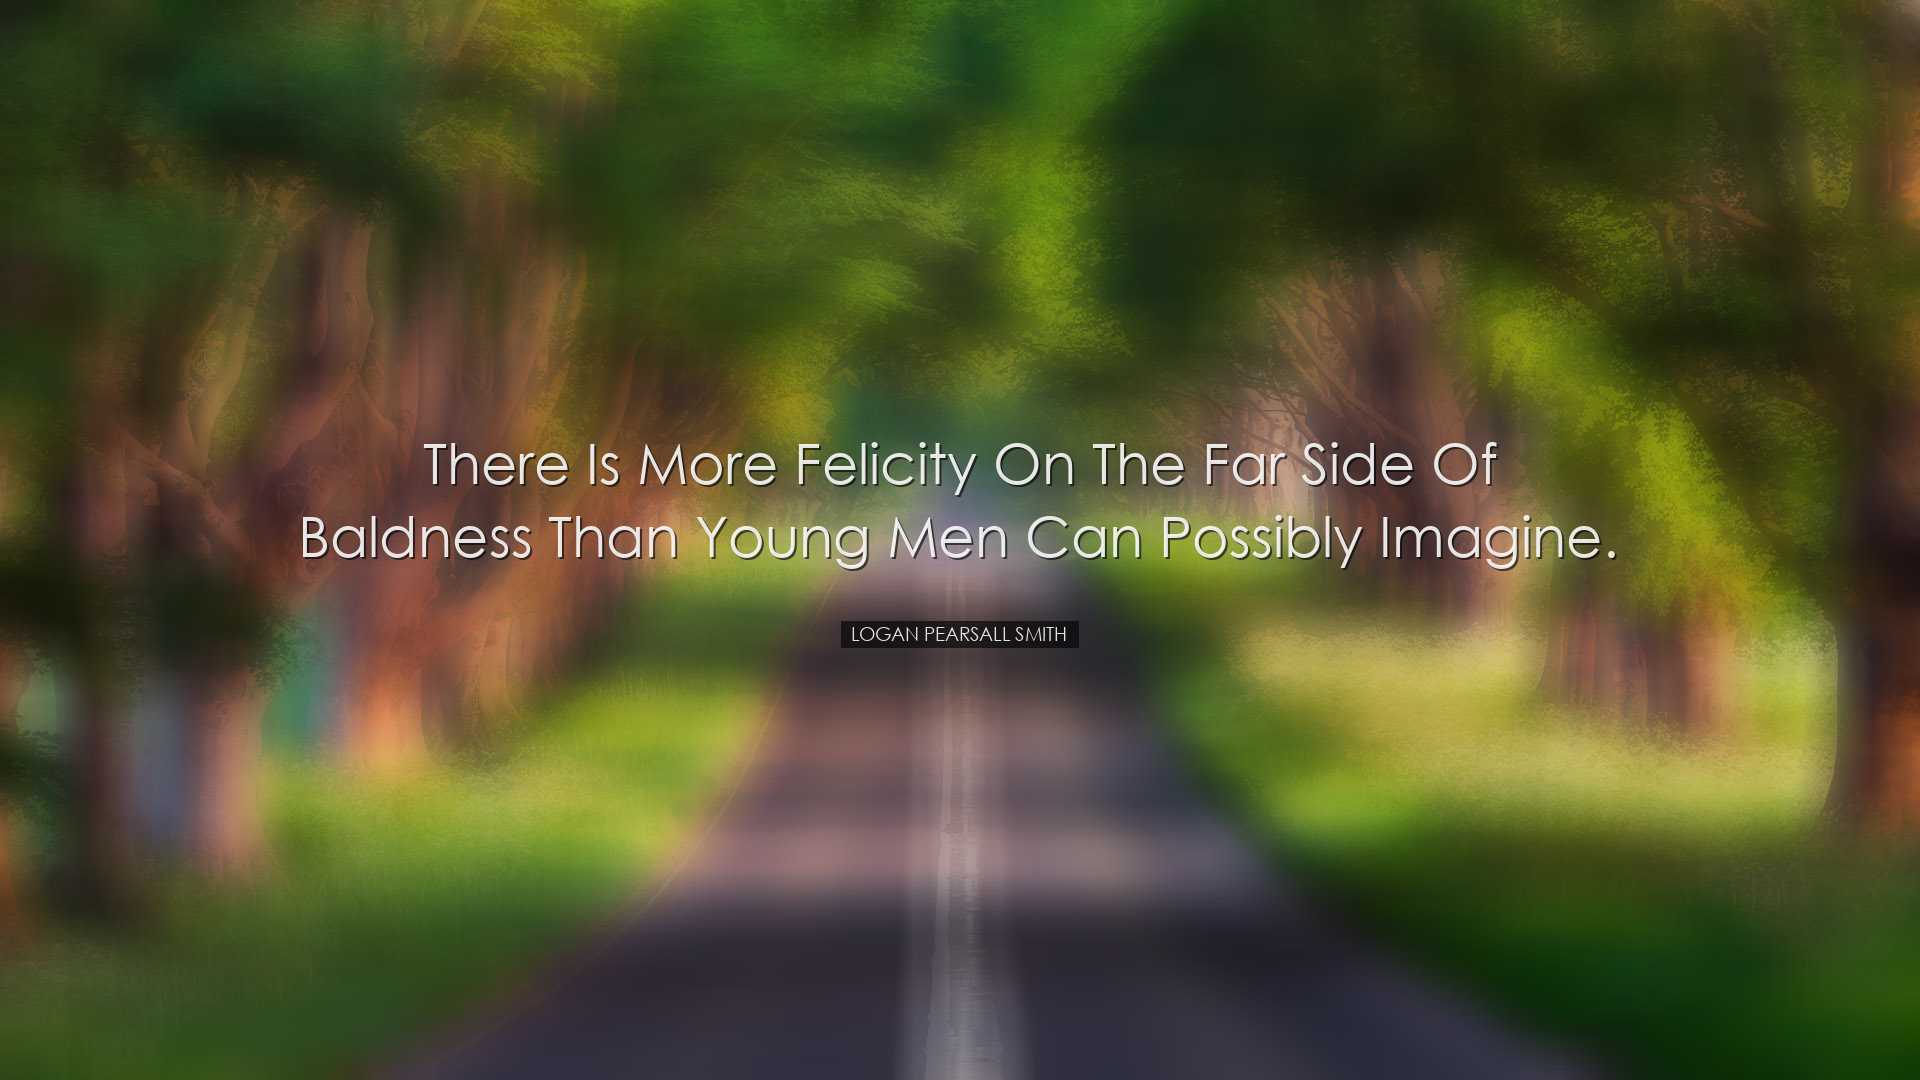 There is more felicity on the far side of baldness than young men